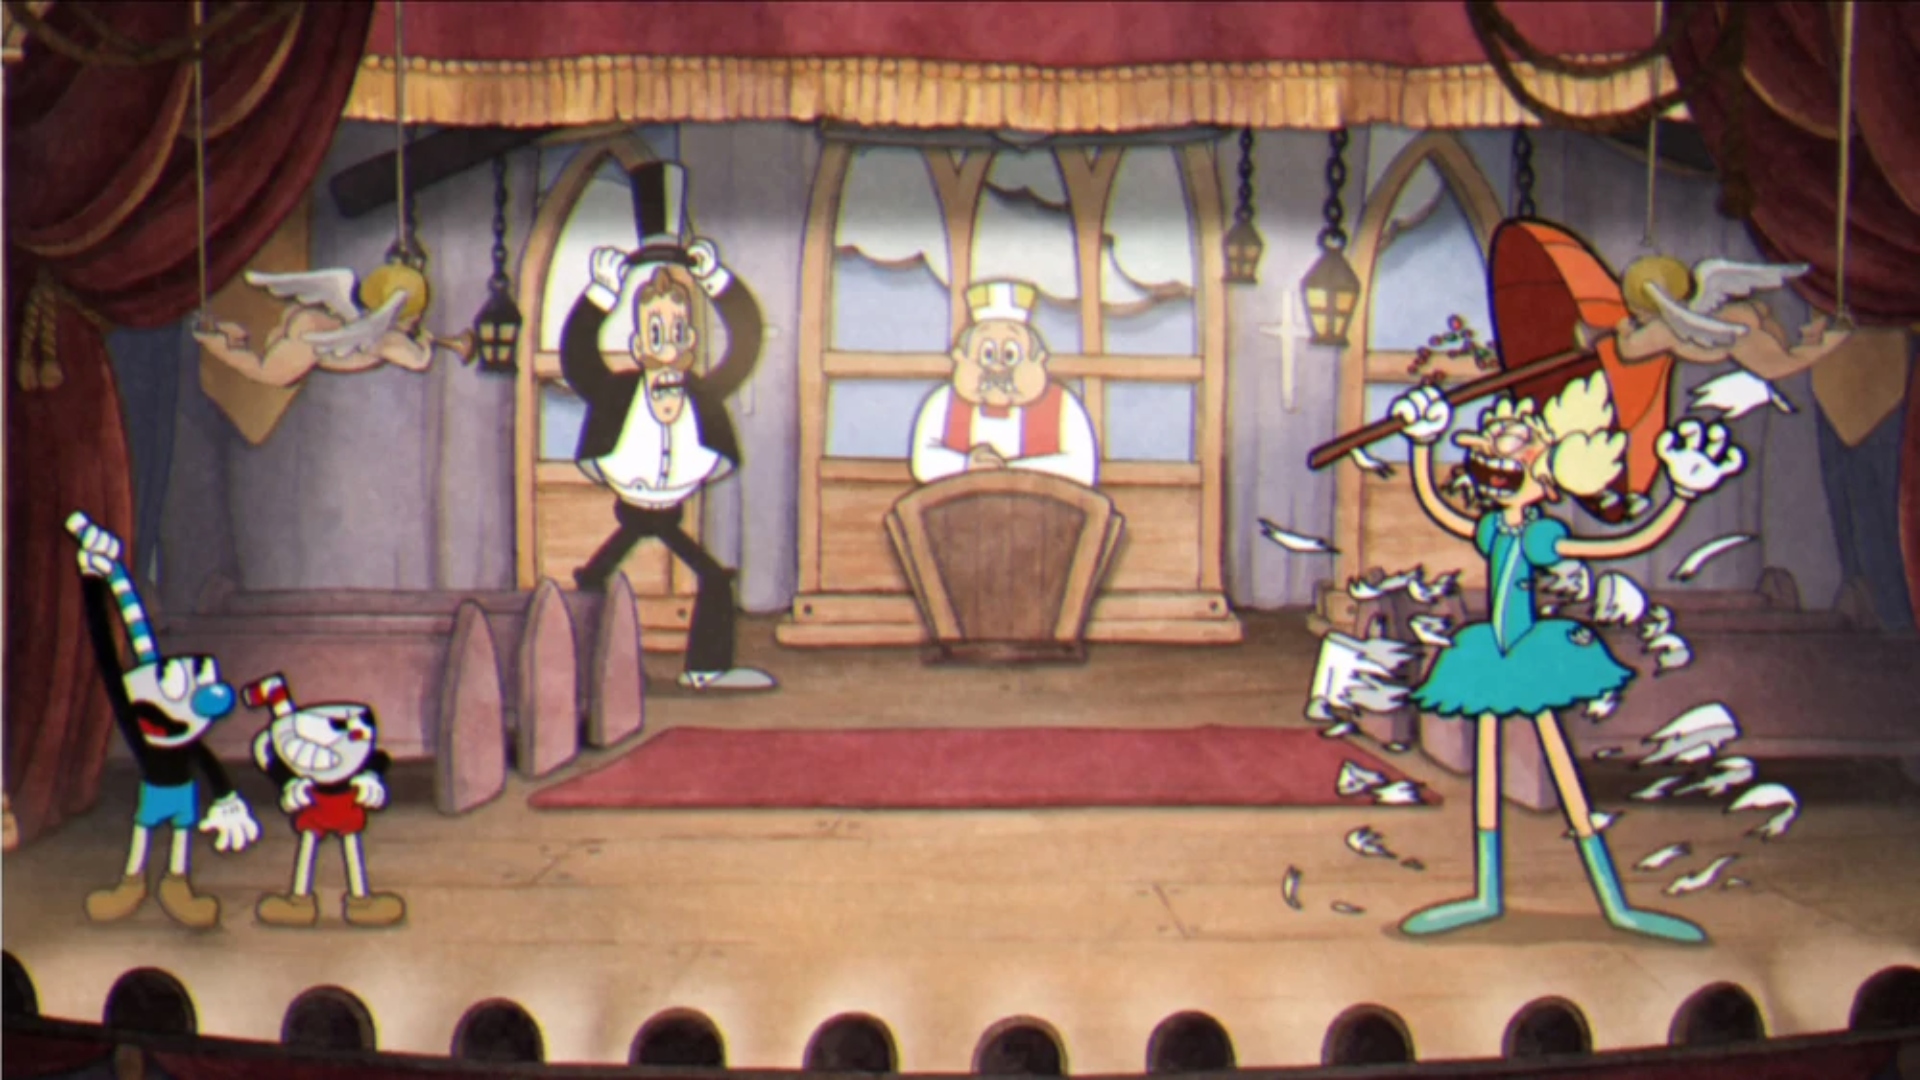 Cuphead Mobile - Cuphead and Mugman in a thatre getting right to fight a blonde-haired boss with an orange umbrella